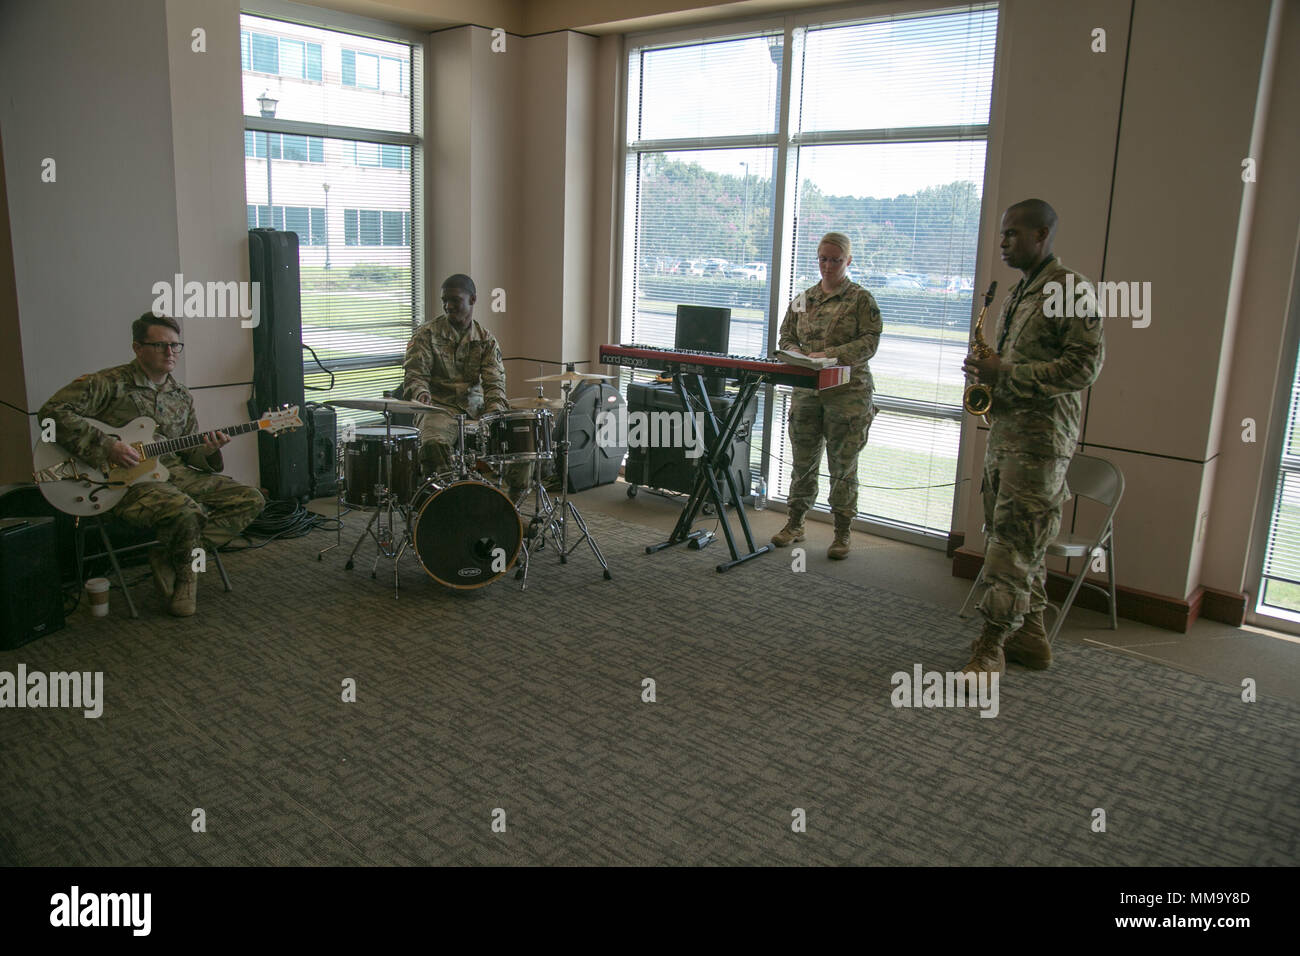 Members of the Army Materiel Command's Band perform during the Hispanic-American Heritage Month Observance Sept. 25, 2017 at Redstone Arsenal, Alabama. The guest speaker for the event was Christine Chavez, granddaughter of labor leader and civil rights activist Cesar Chavez. (U.S. Army photo by Sgt. 1st Class Teddy Wade) Stock Photo